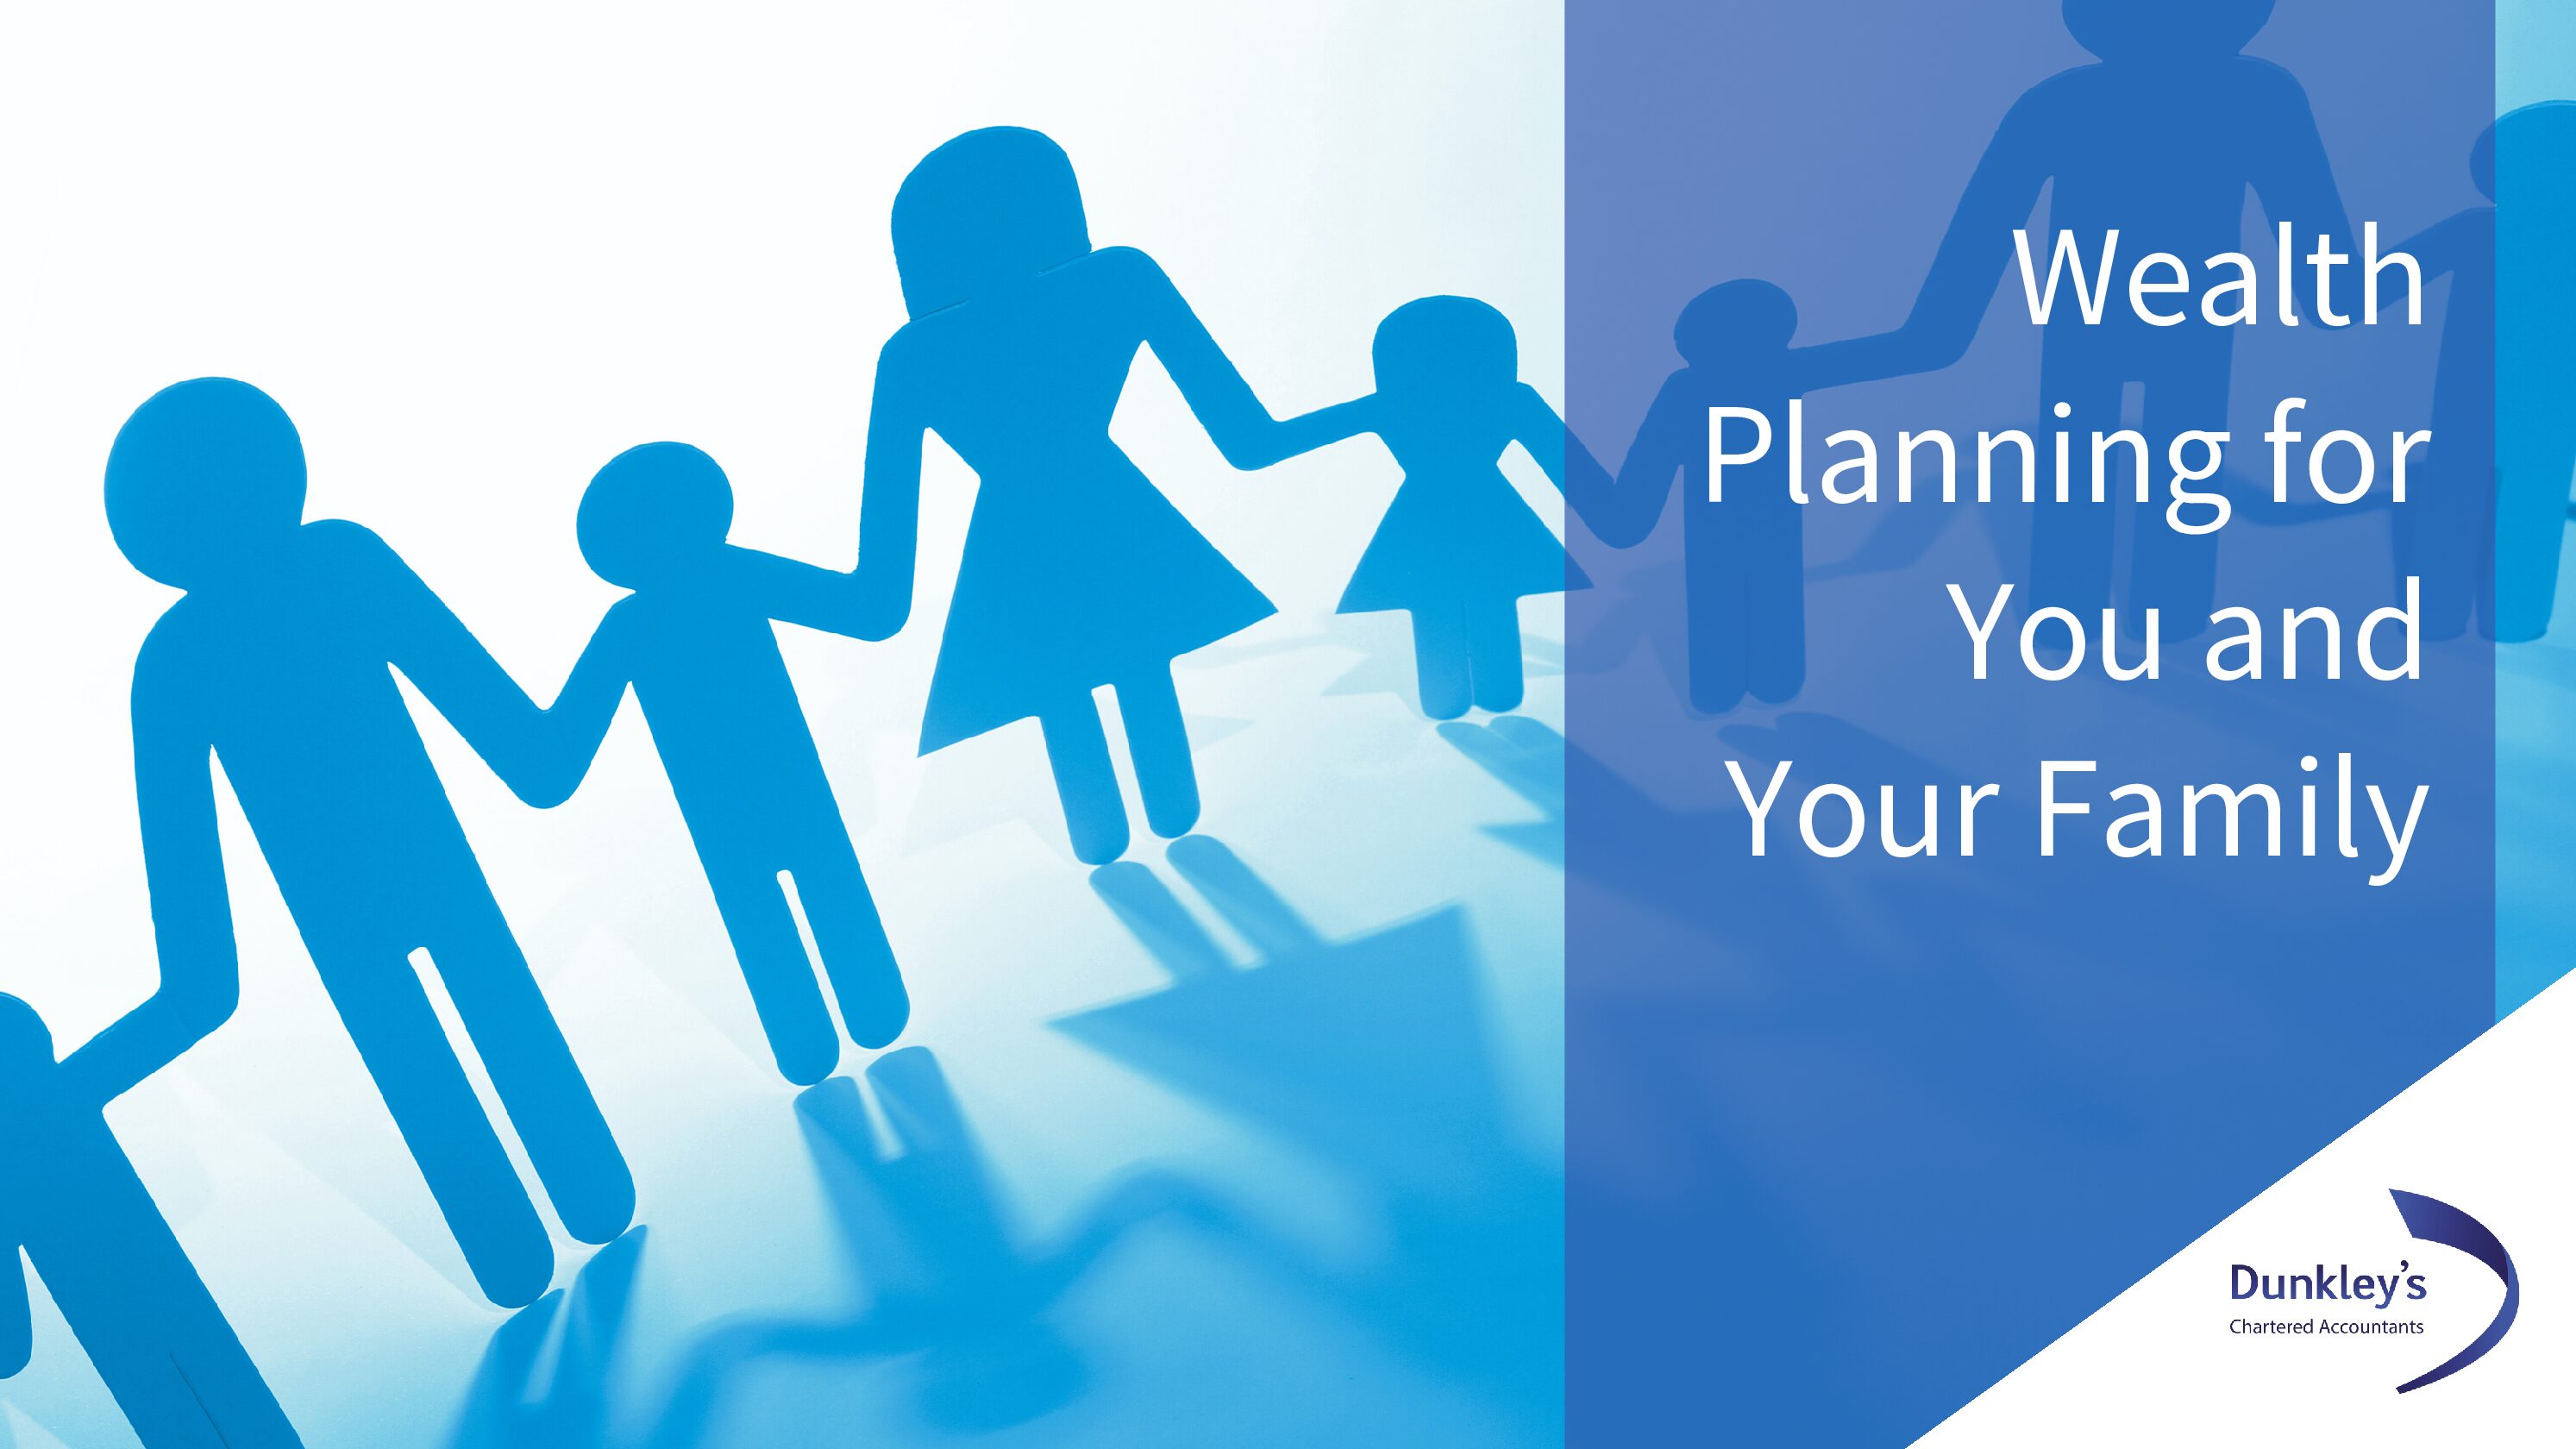 Wealth Planning for You and Your Family